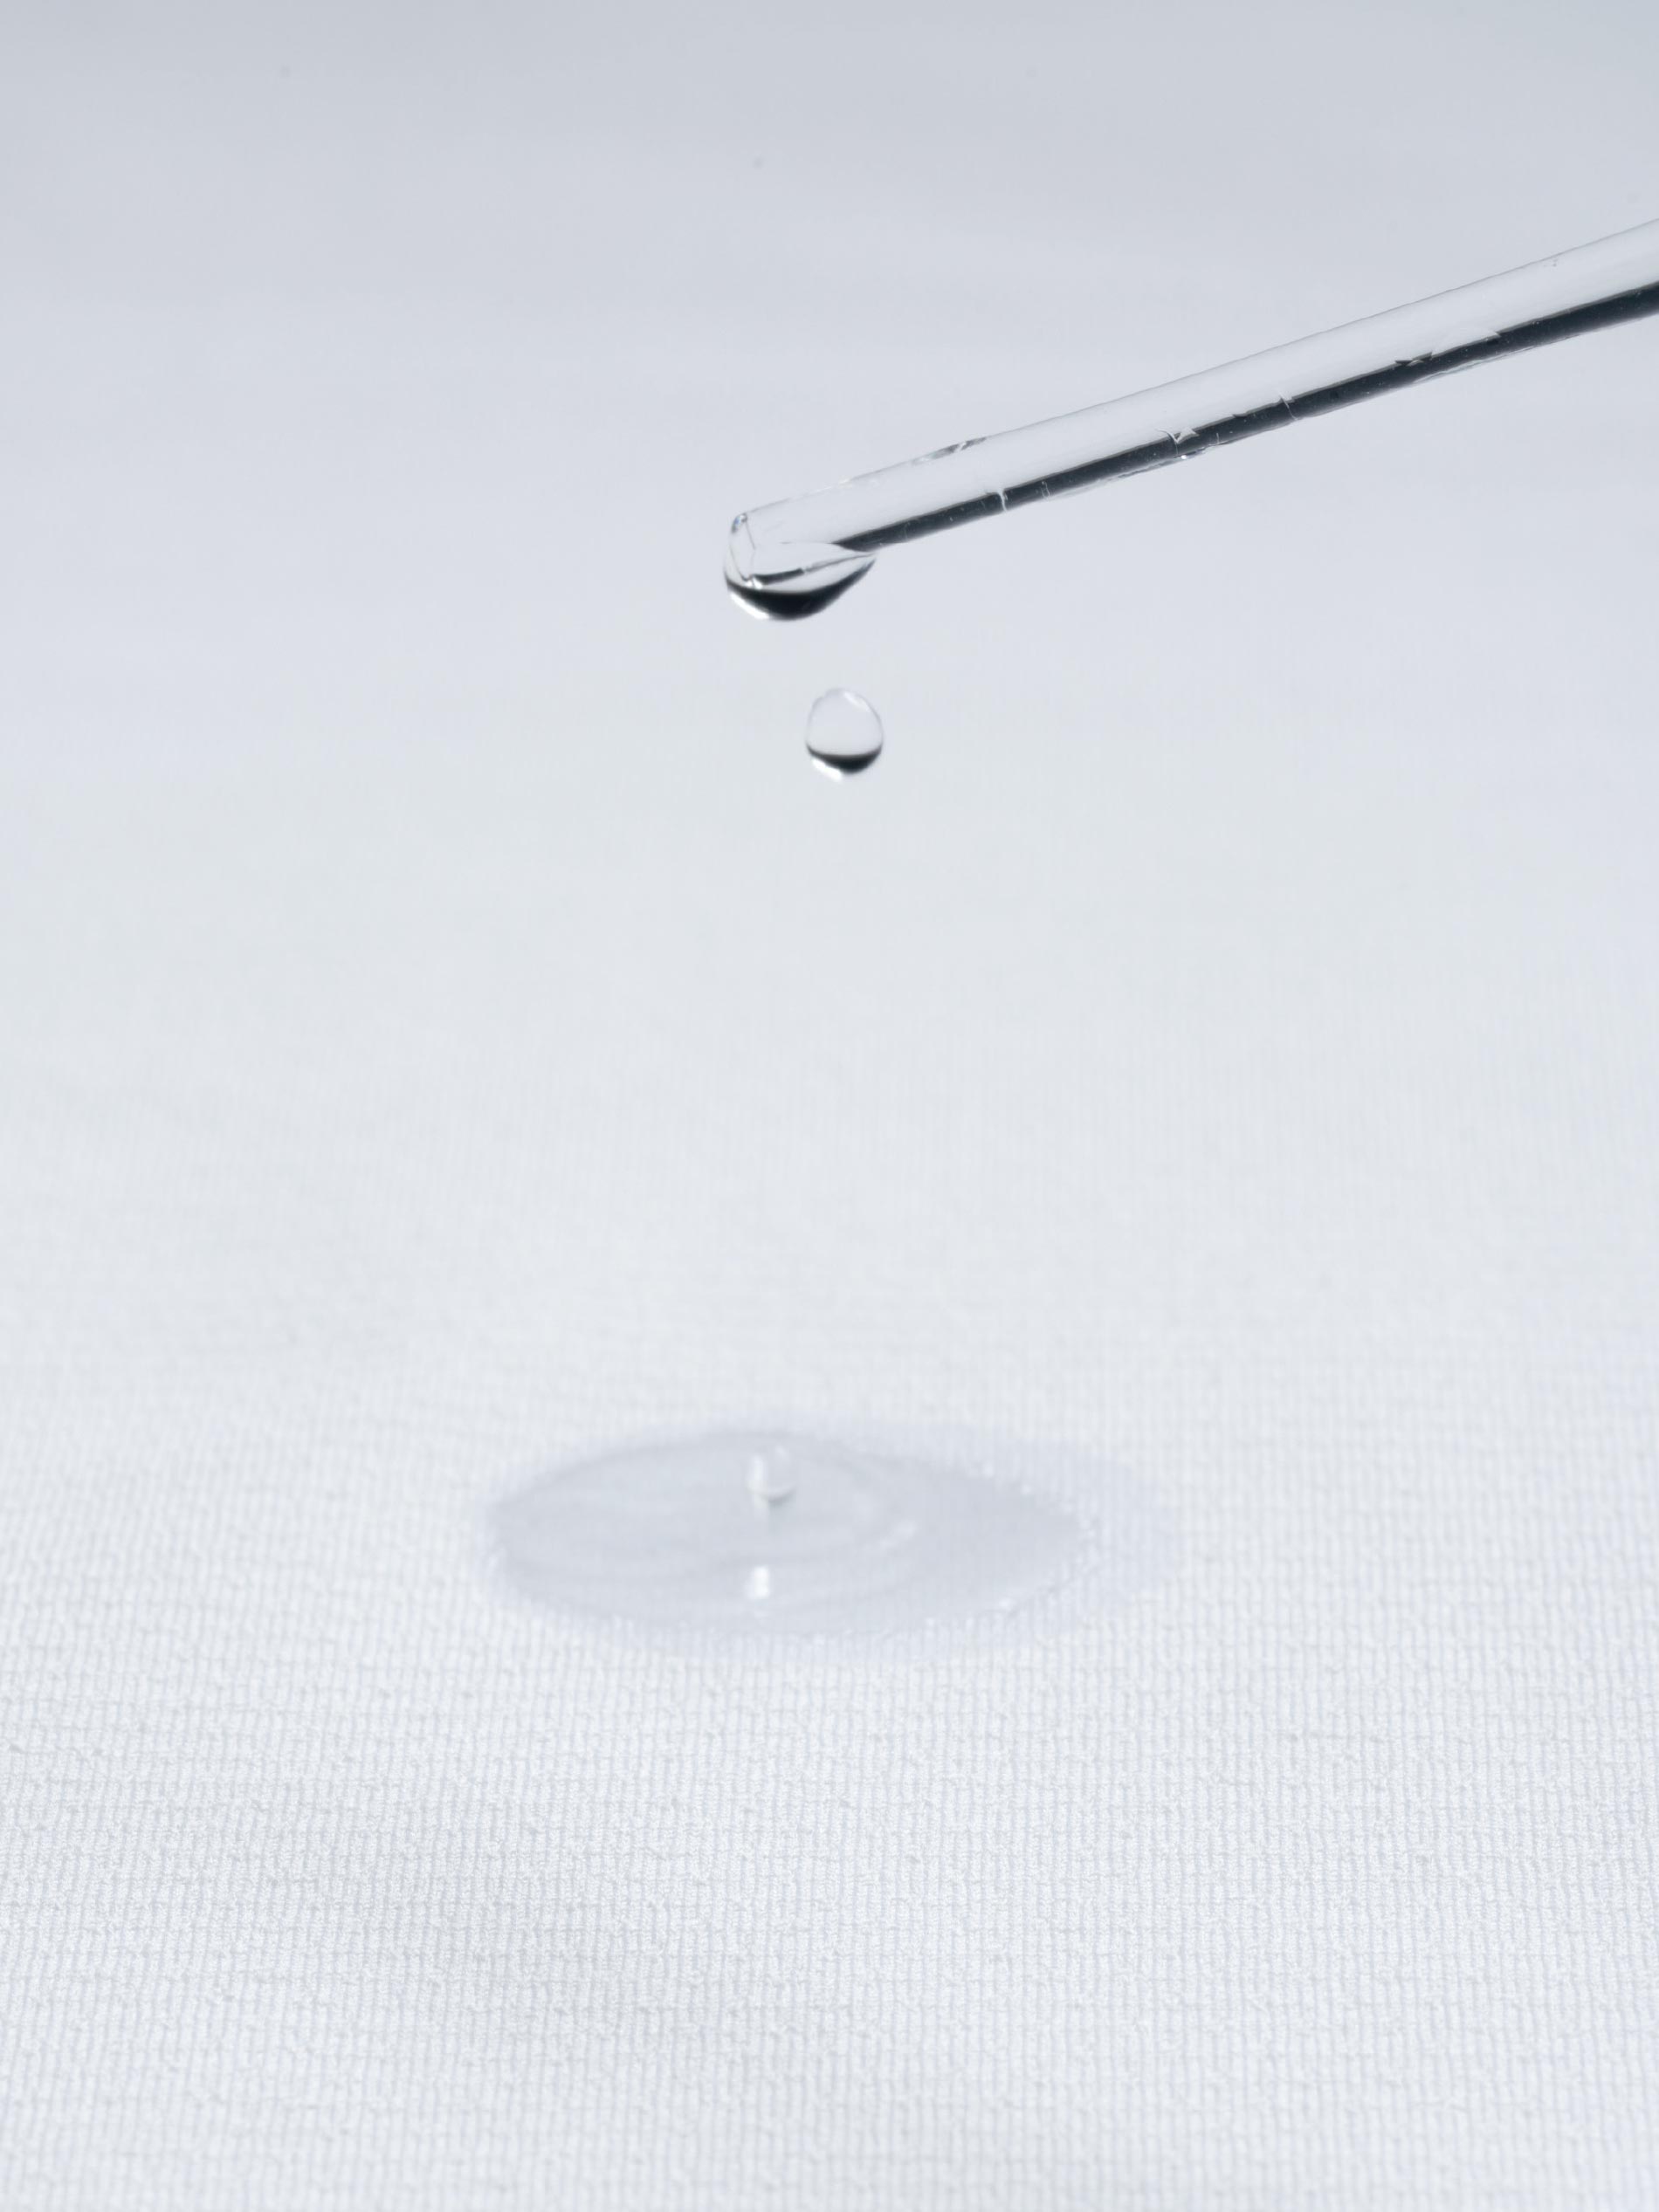 fabric layer with hydrophilic properties: water droplets are dripped onto white fabric from a pipette; they are instantly absorbed | mey®